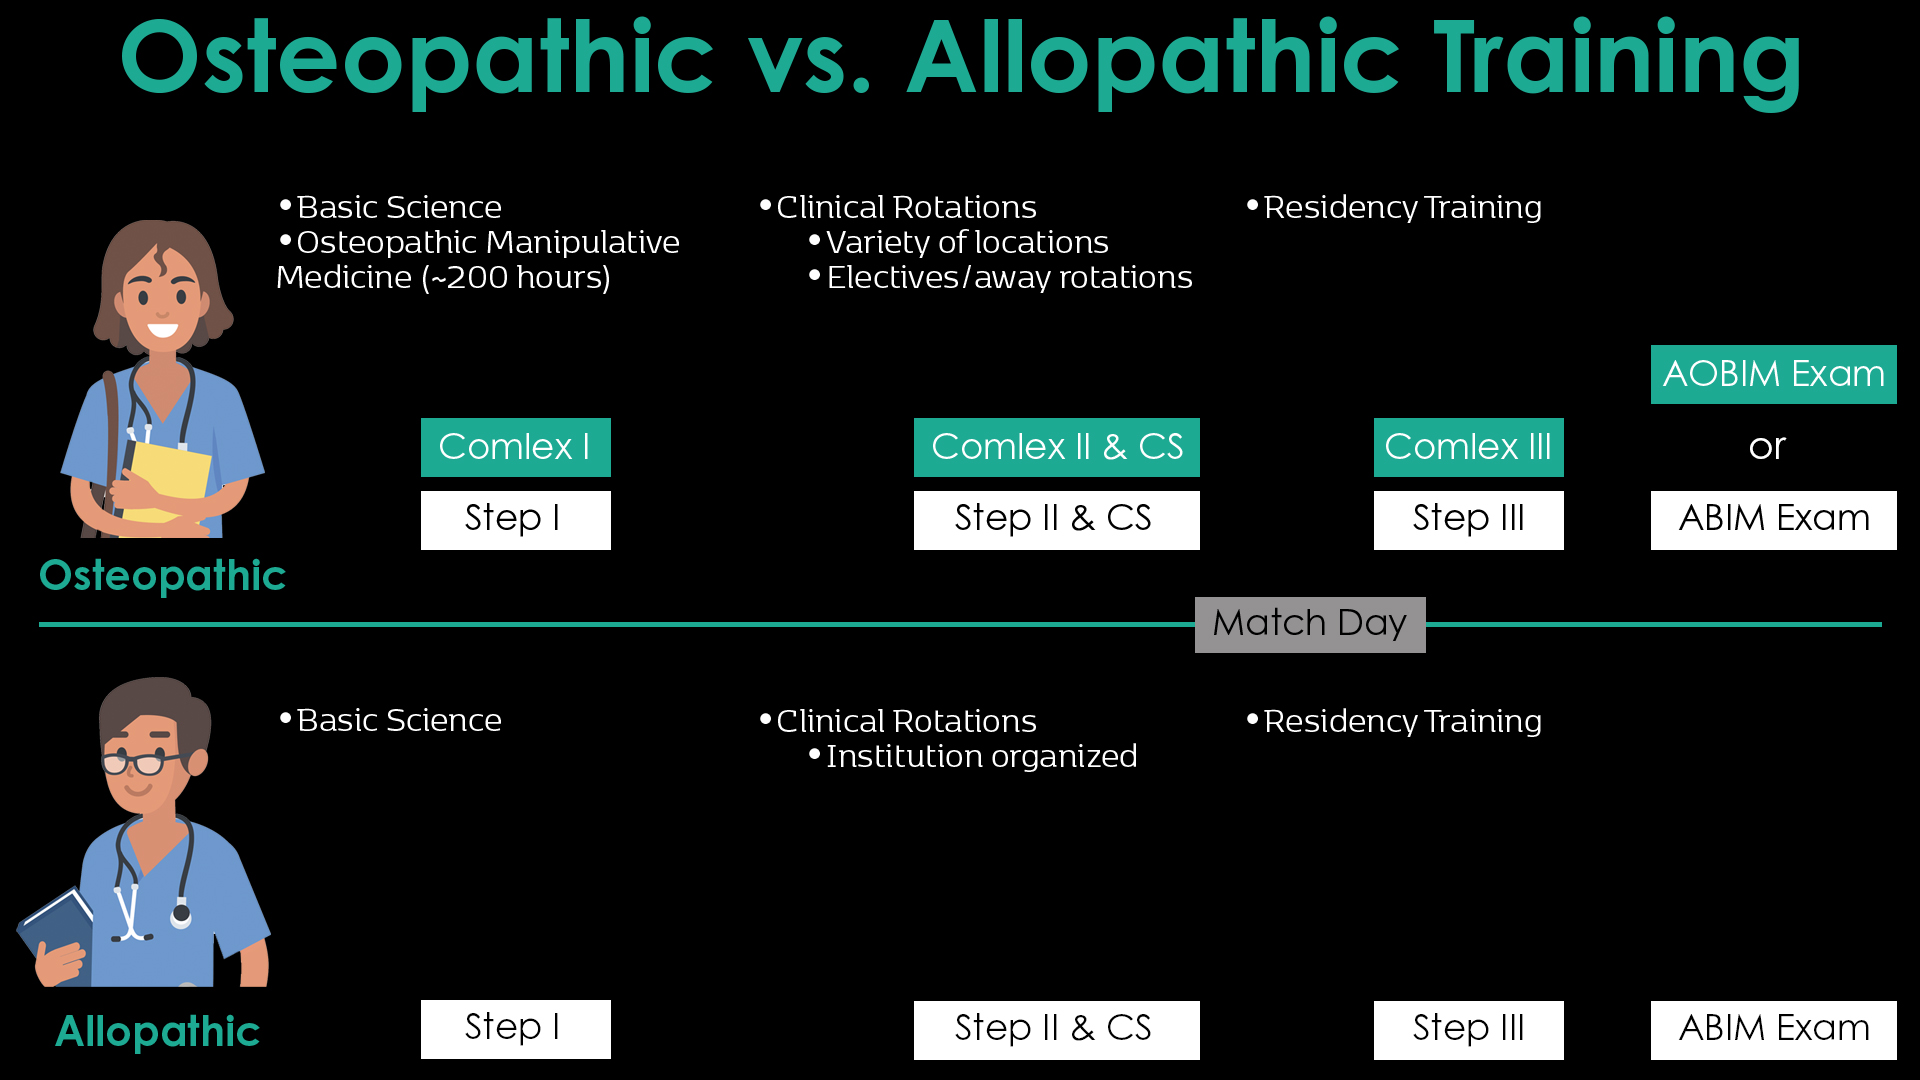 Osteopathic vs. Allopathic Training